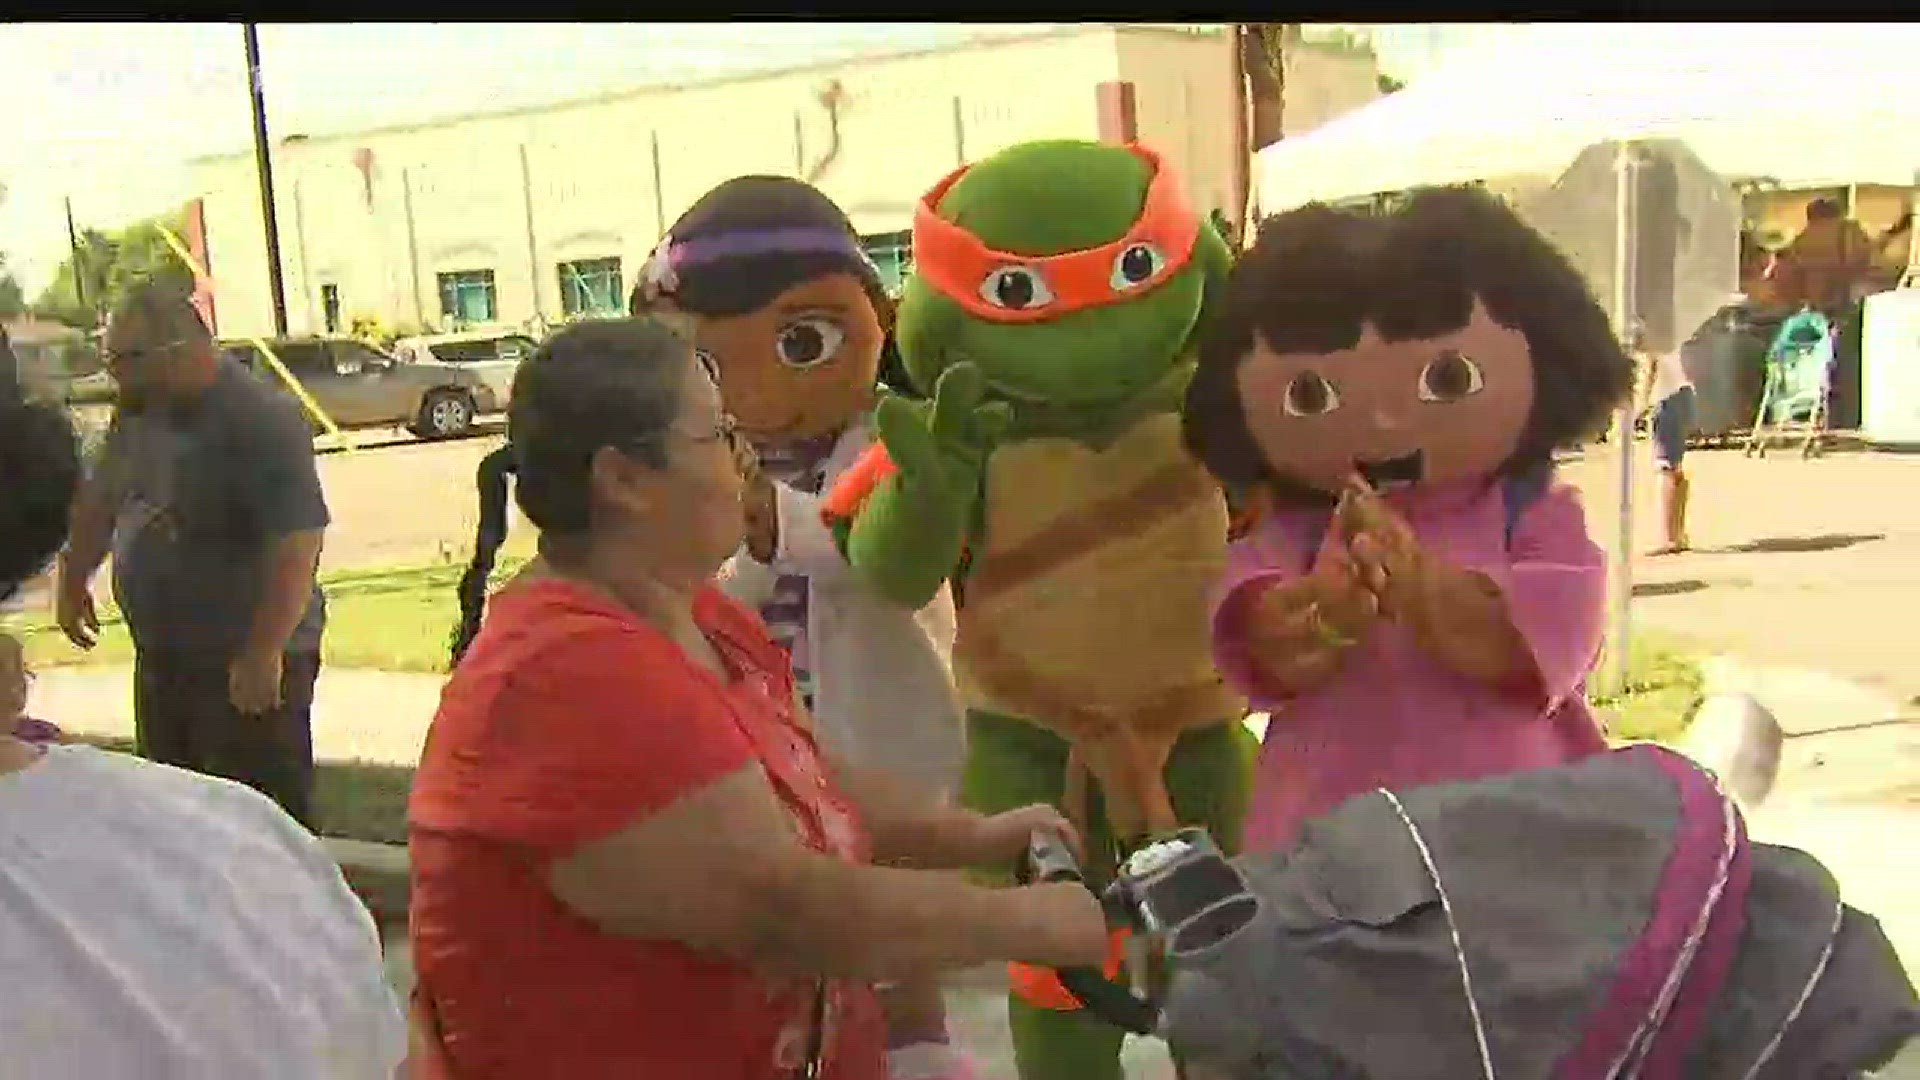 A celebration held at the health center parking lot for NICU reunion.